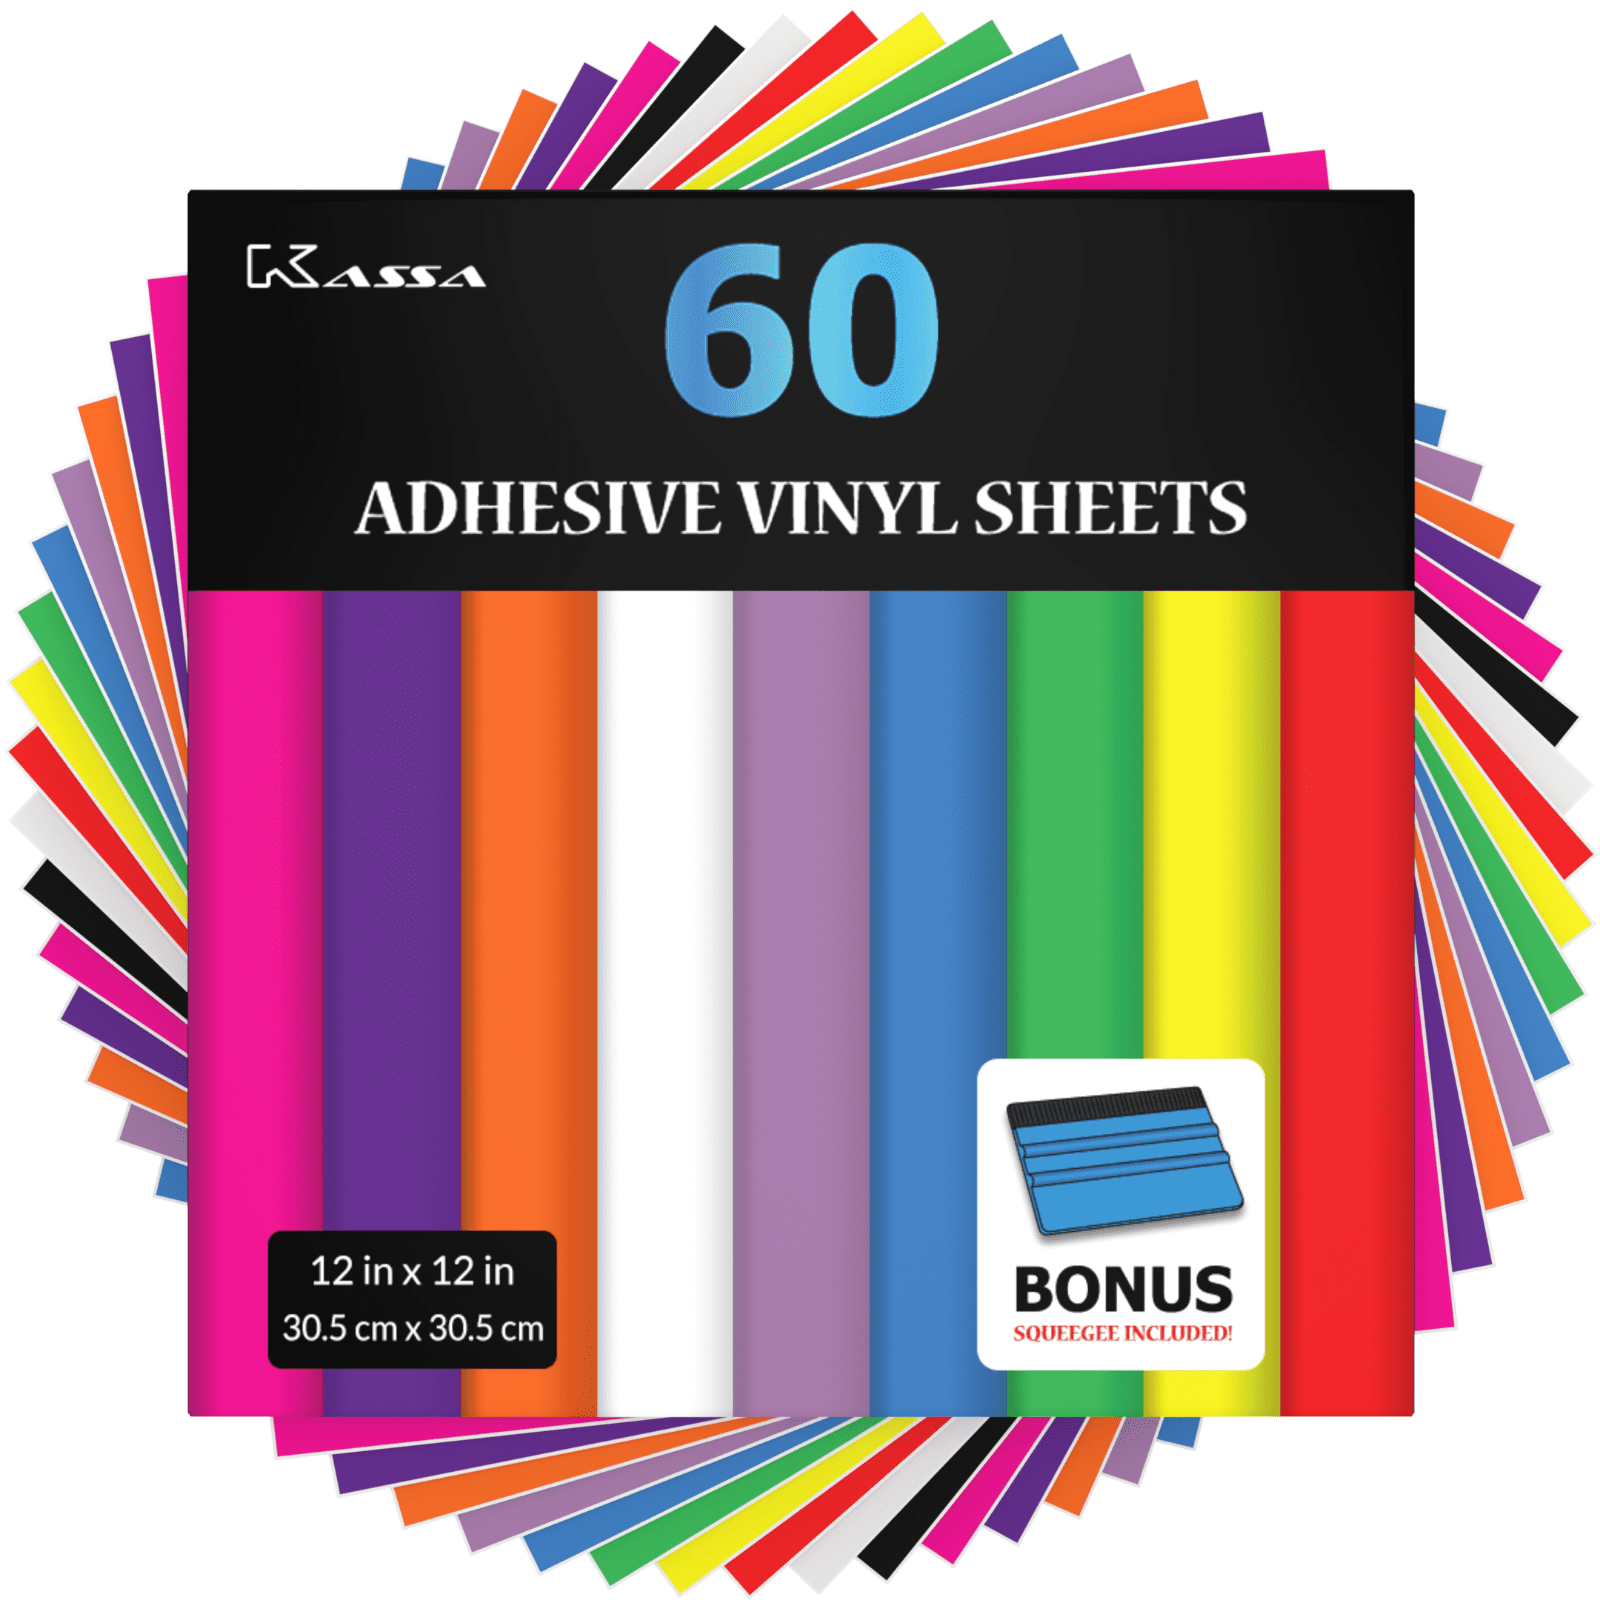 75 Self adhesive Hobby/Sign vinyl sheets Odd Sizes, most at least 6" x 12" 